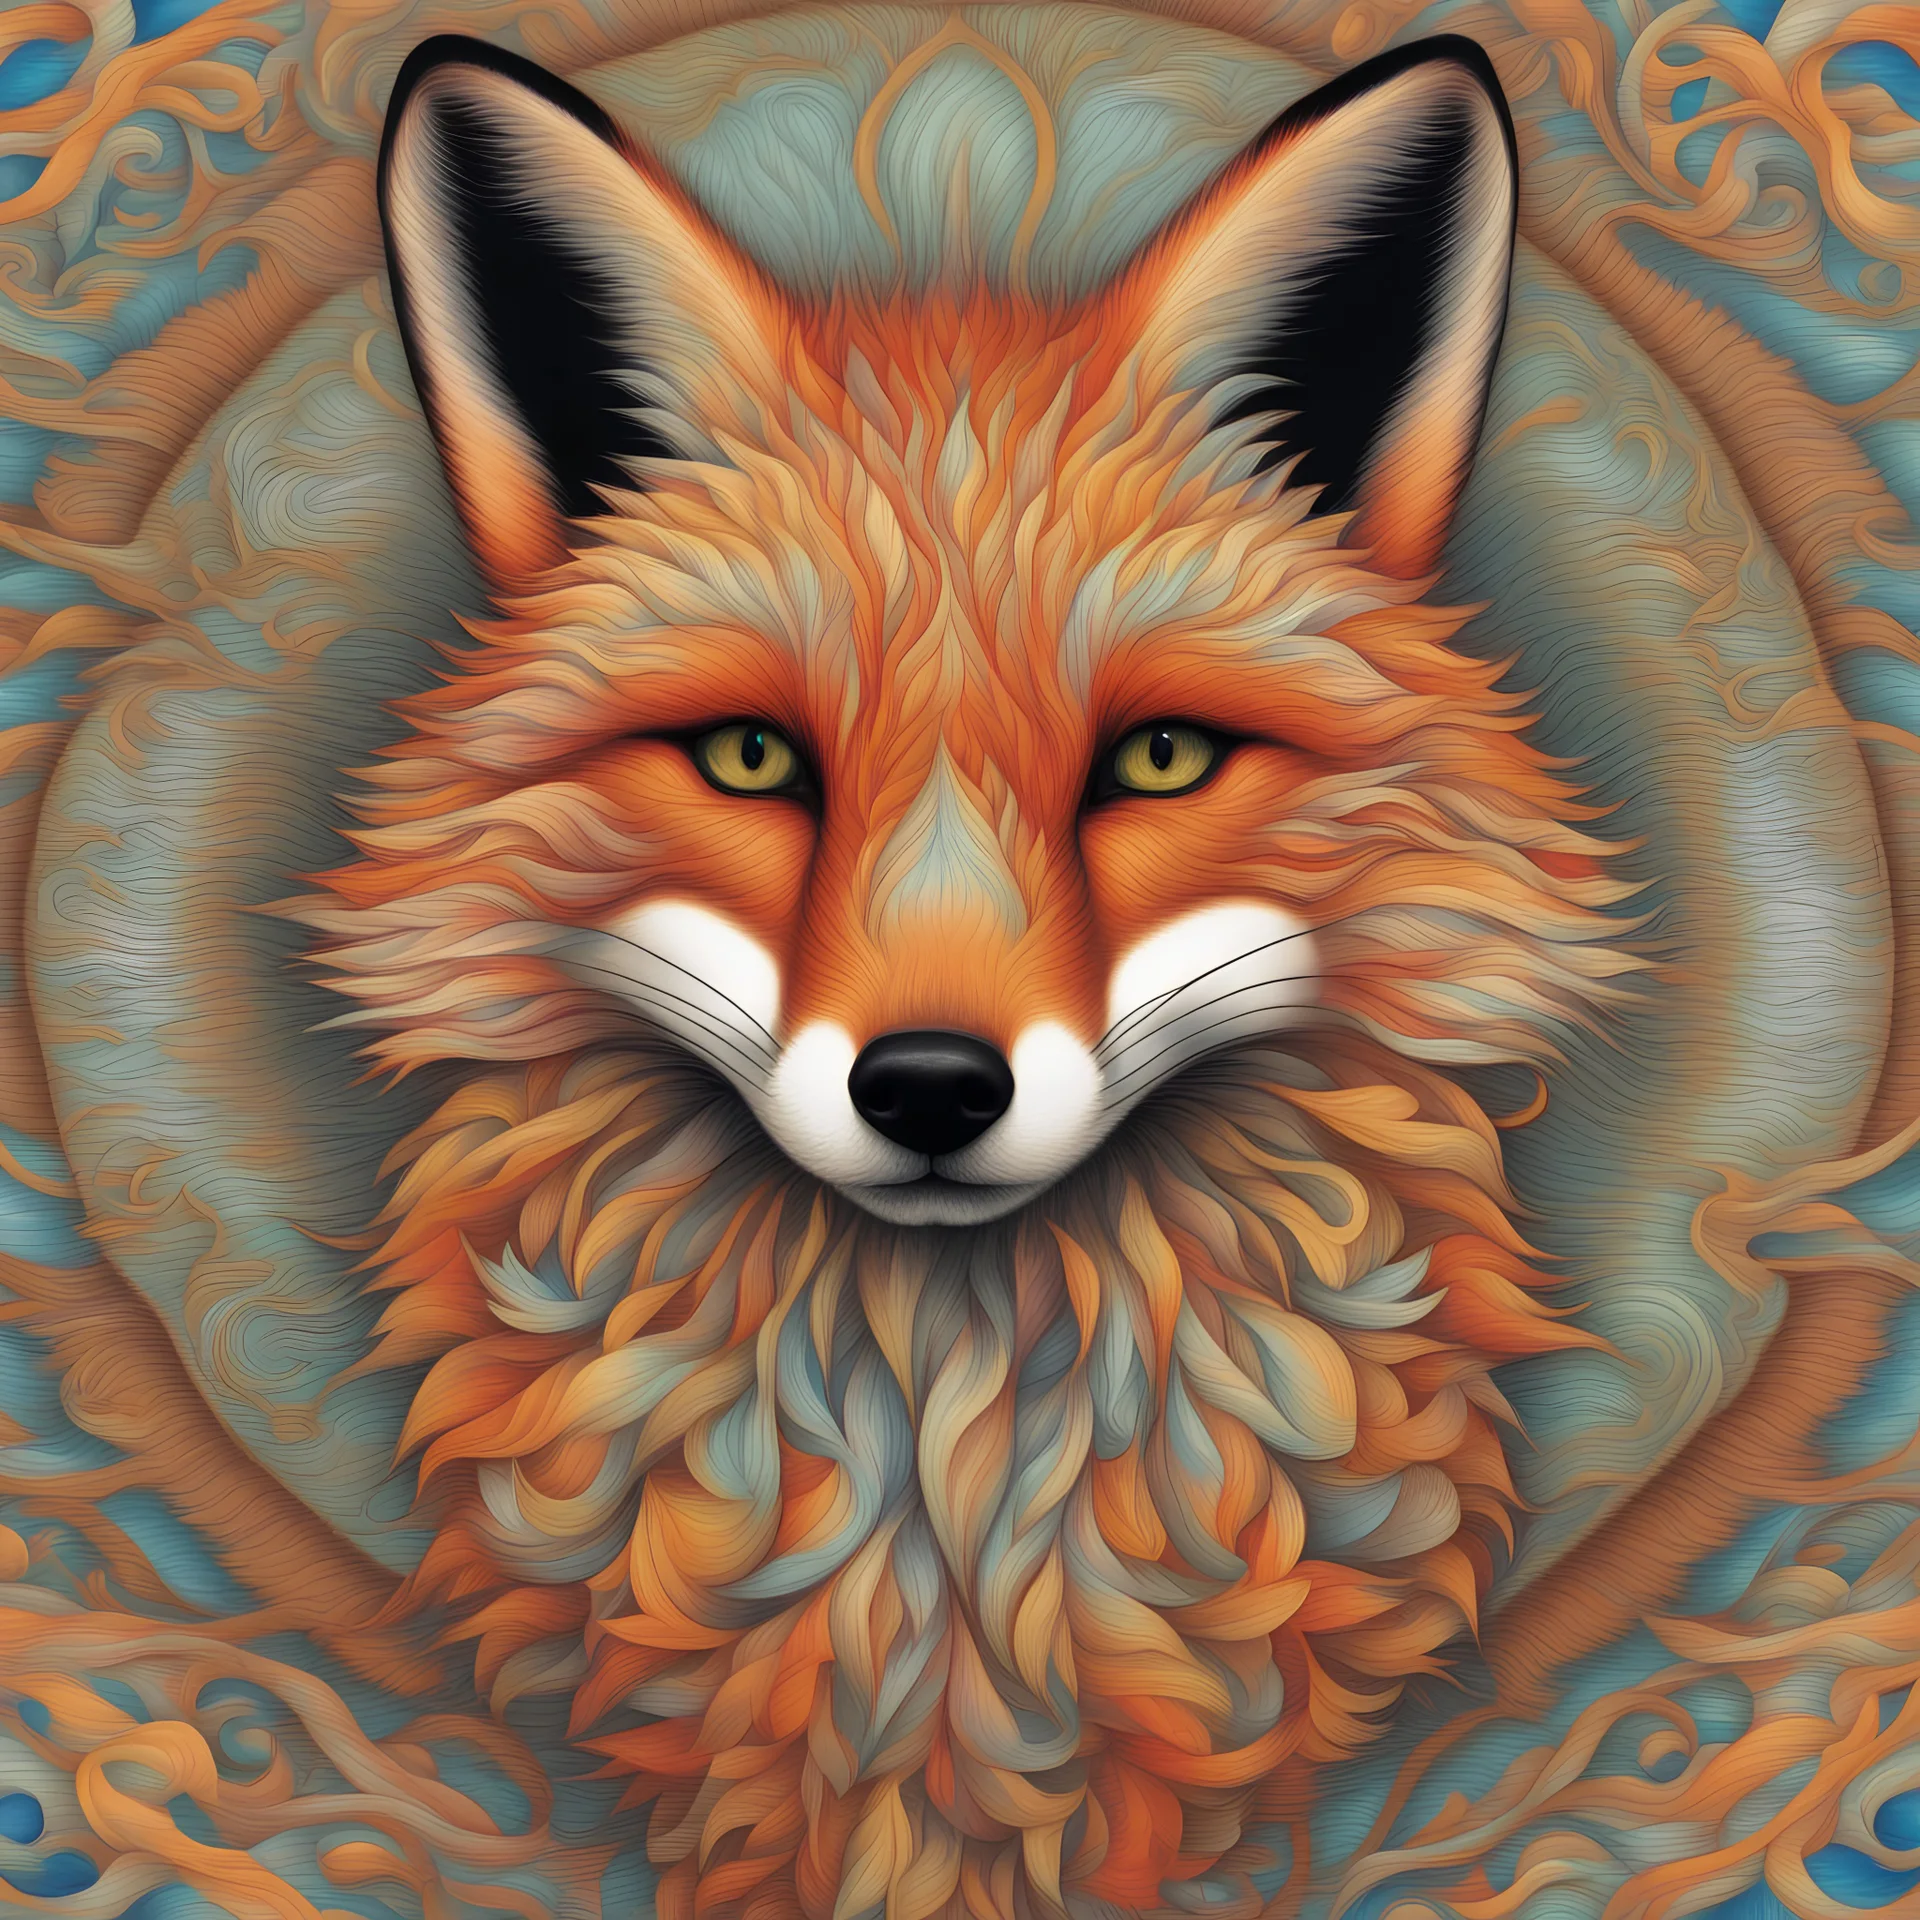 A mesmerizing optical illusion of a fox image, in an intricate guilloche style with overlapping bright colors,